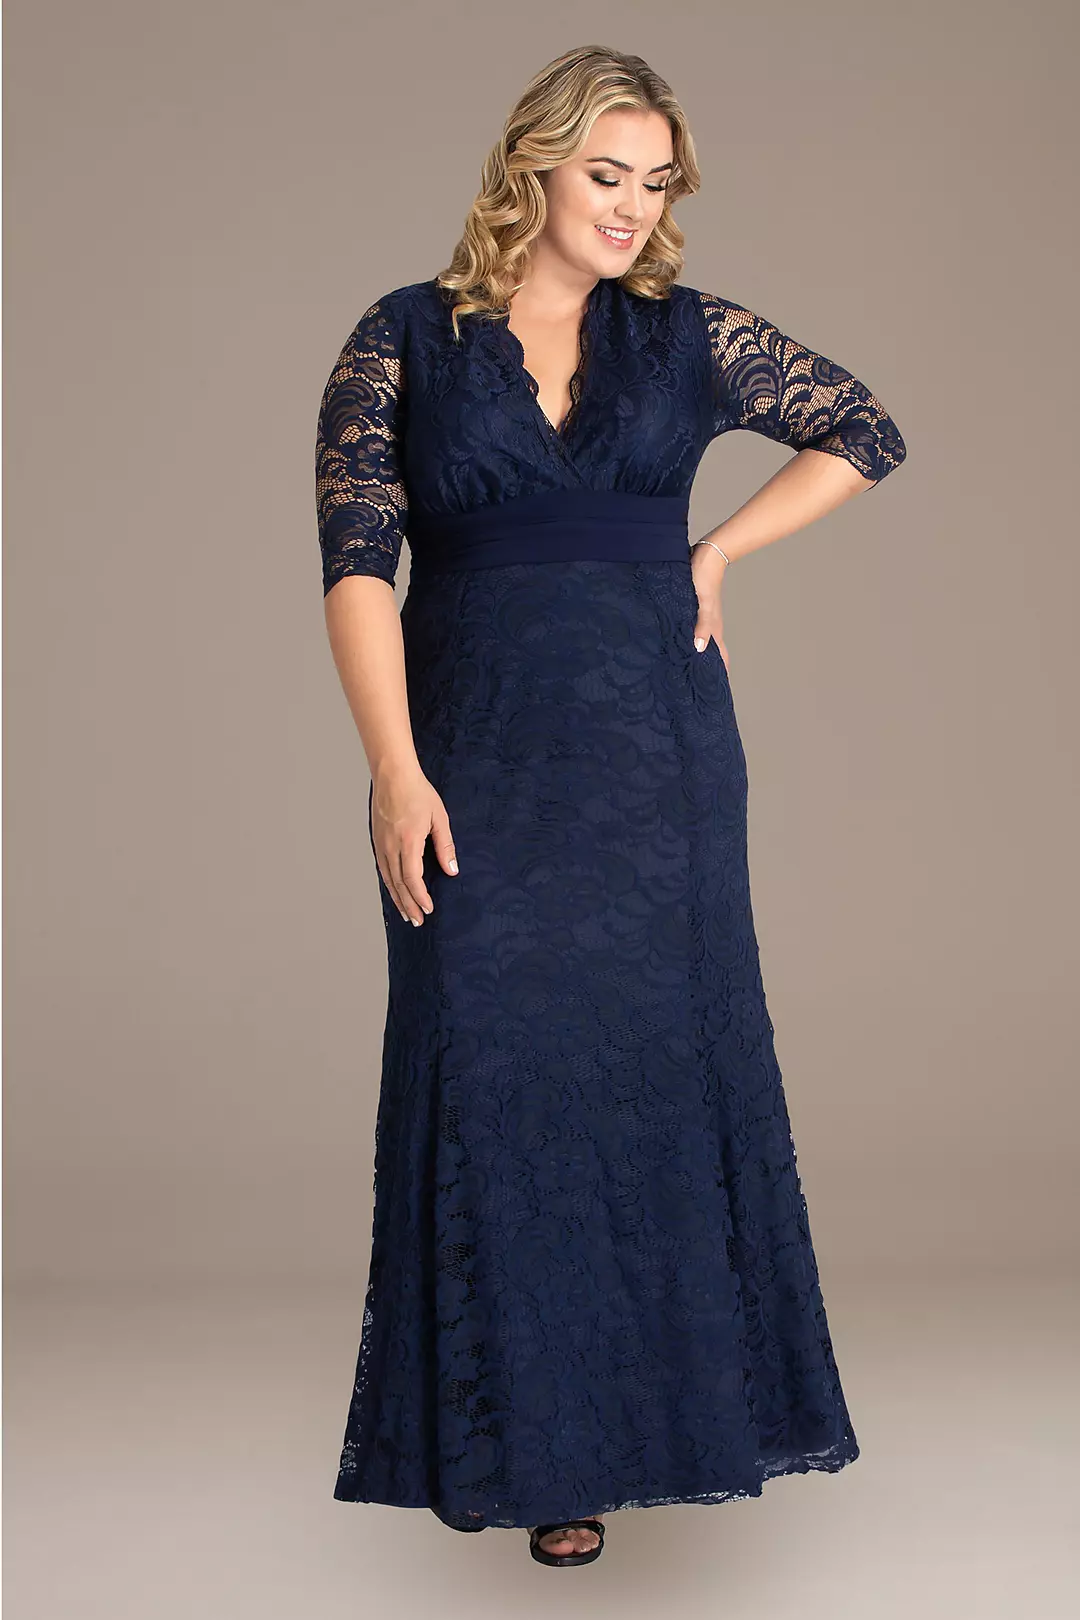 Screen Siren V-Neck Lace Plus Size Gown Image